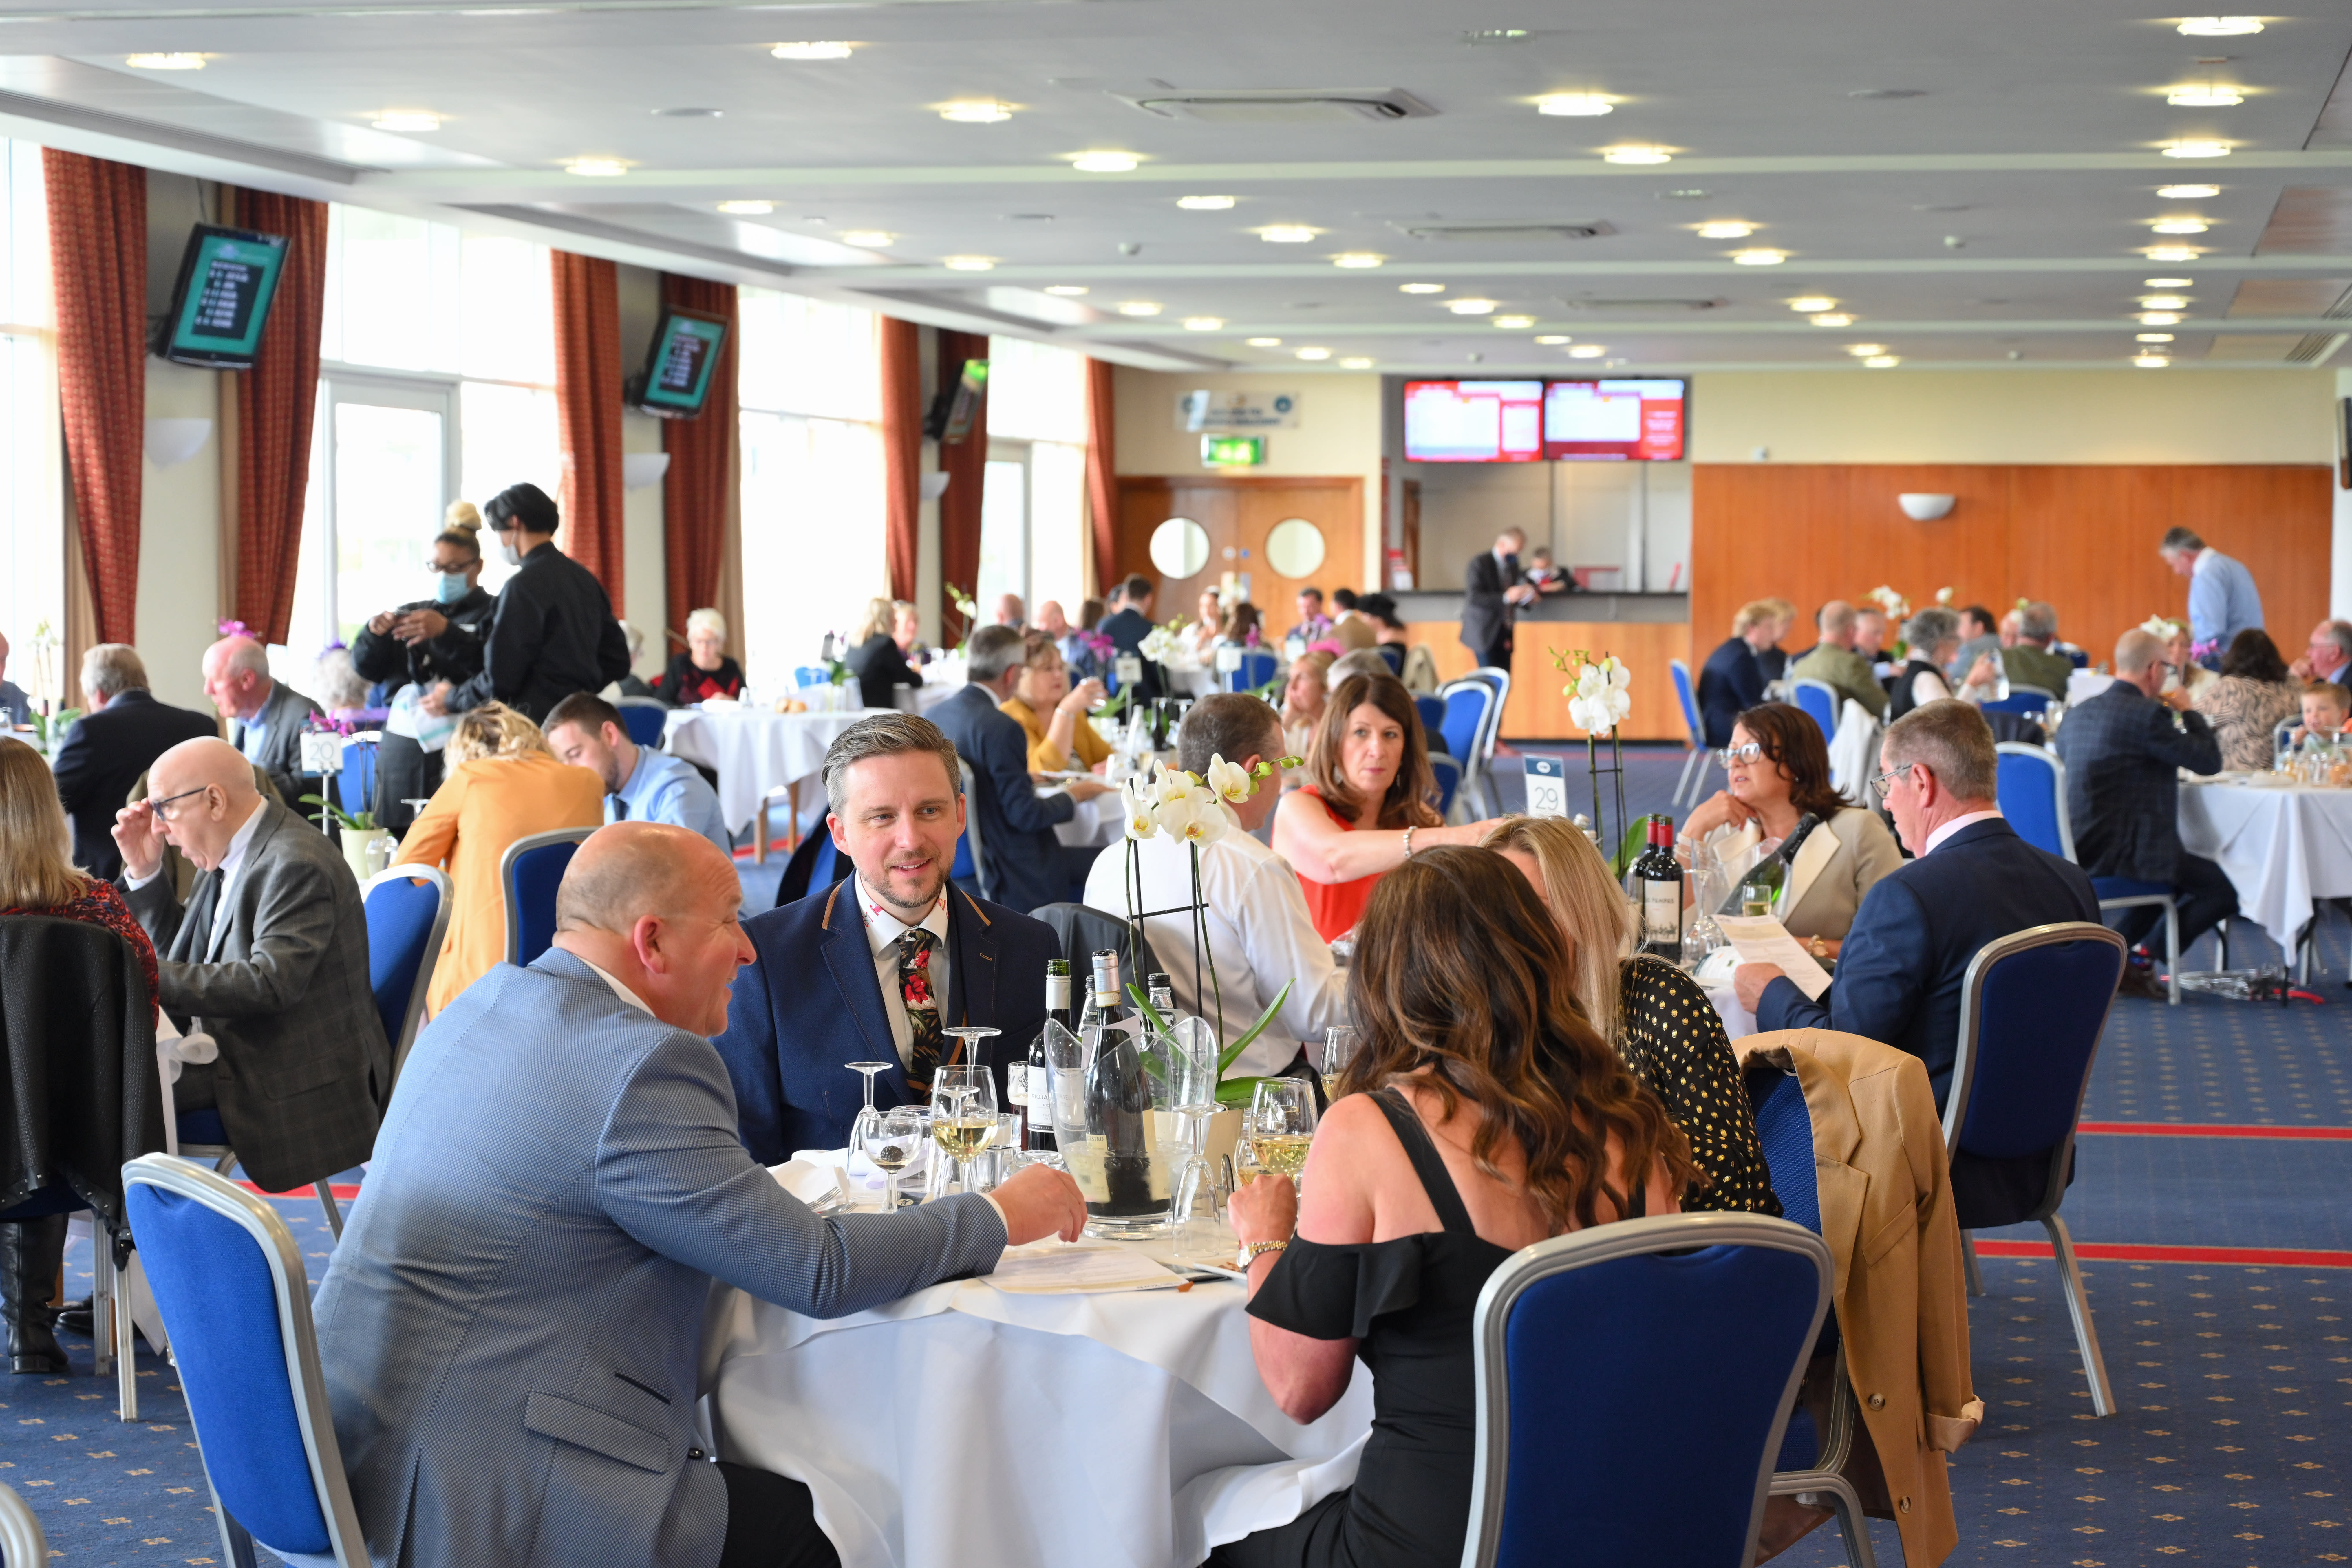 Guests enjoy hospitality in the Voltiguer Restaurant